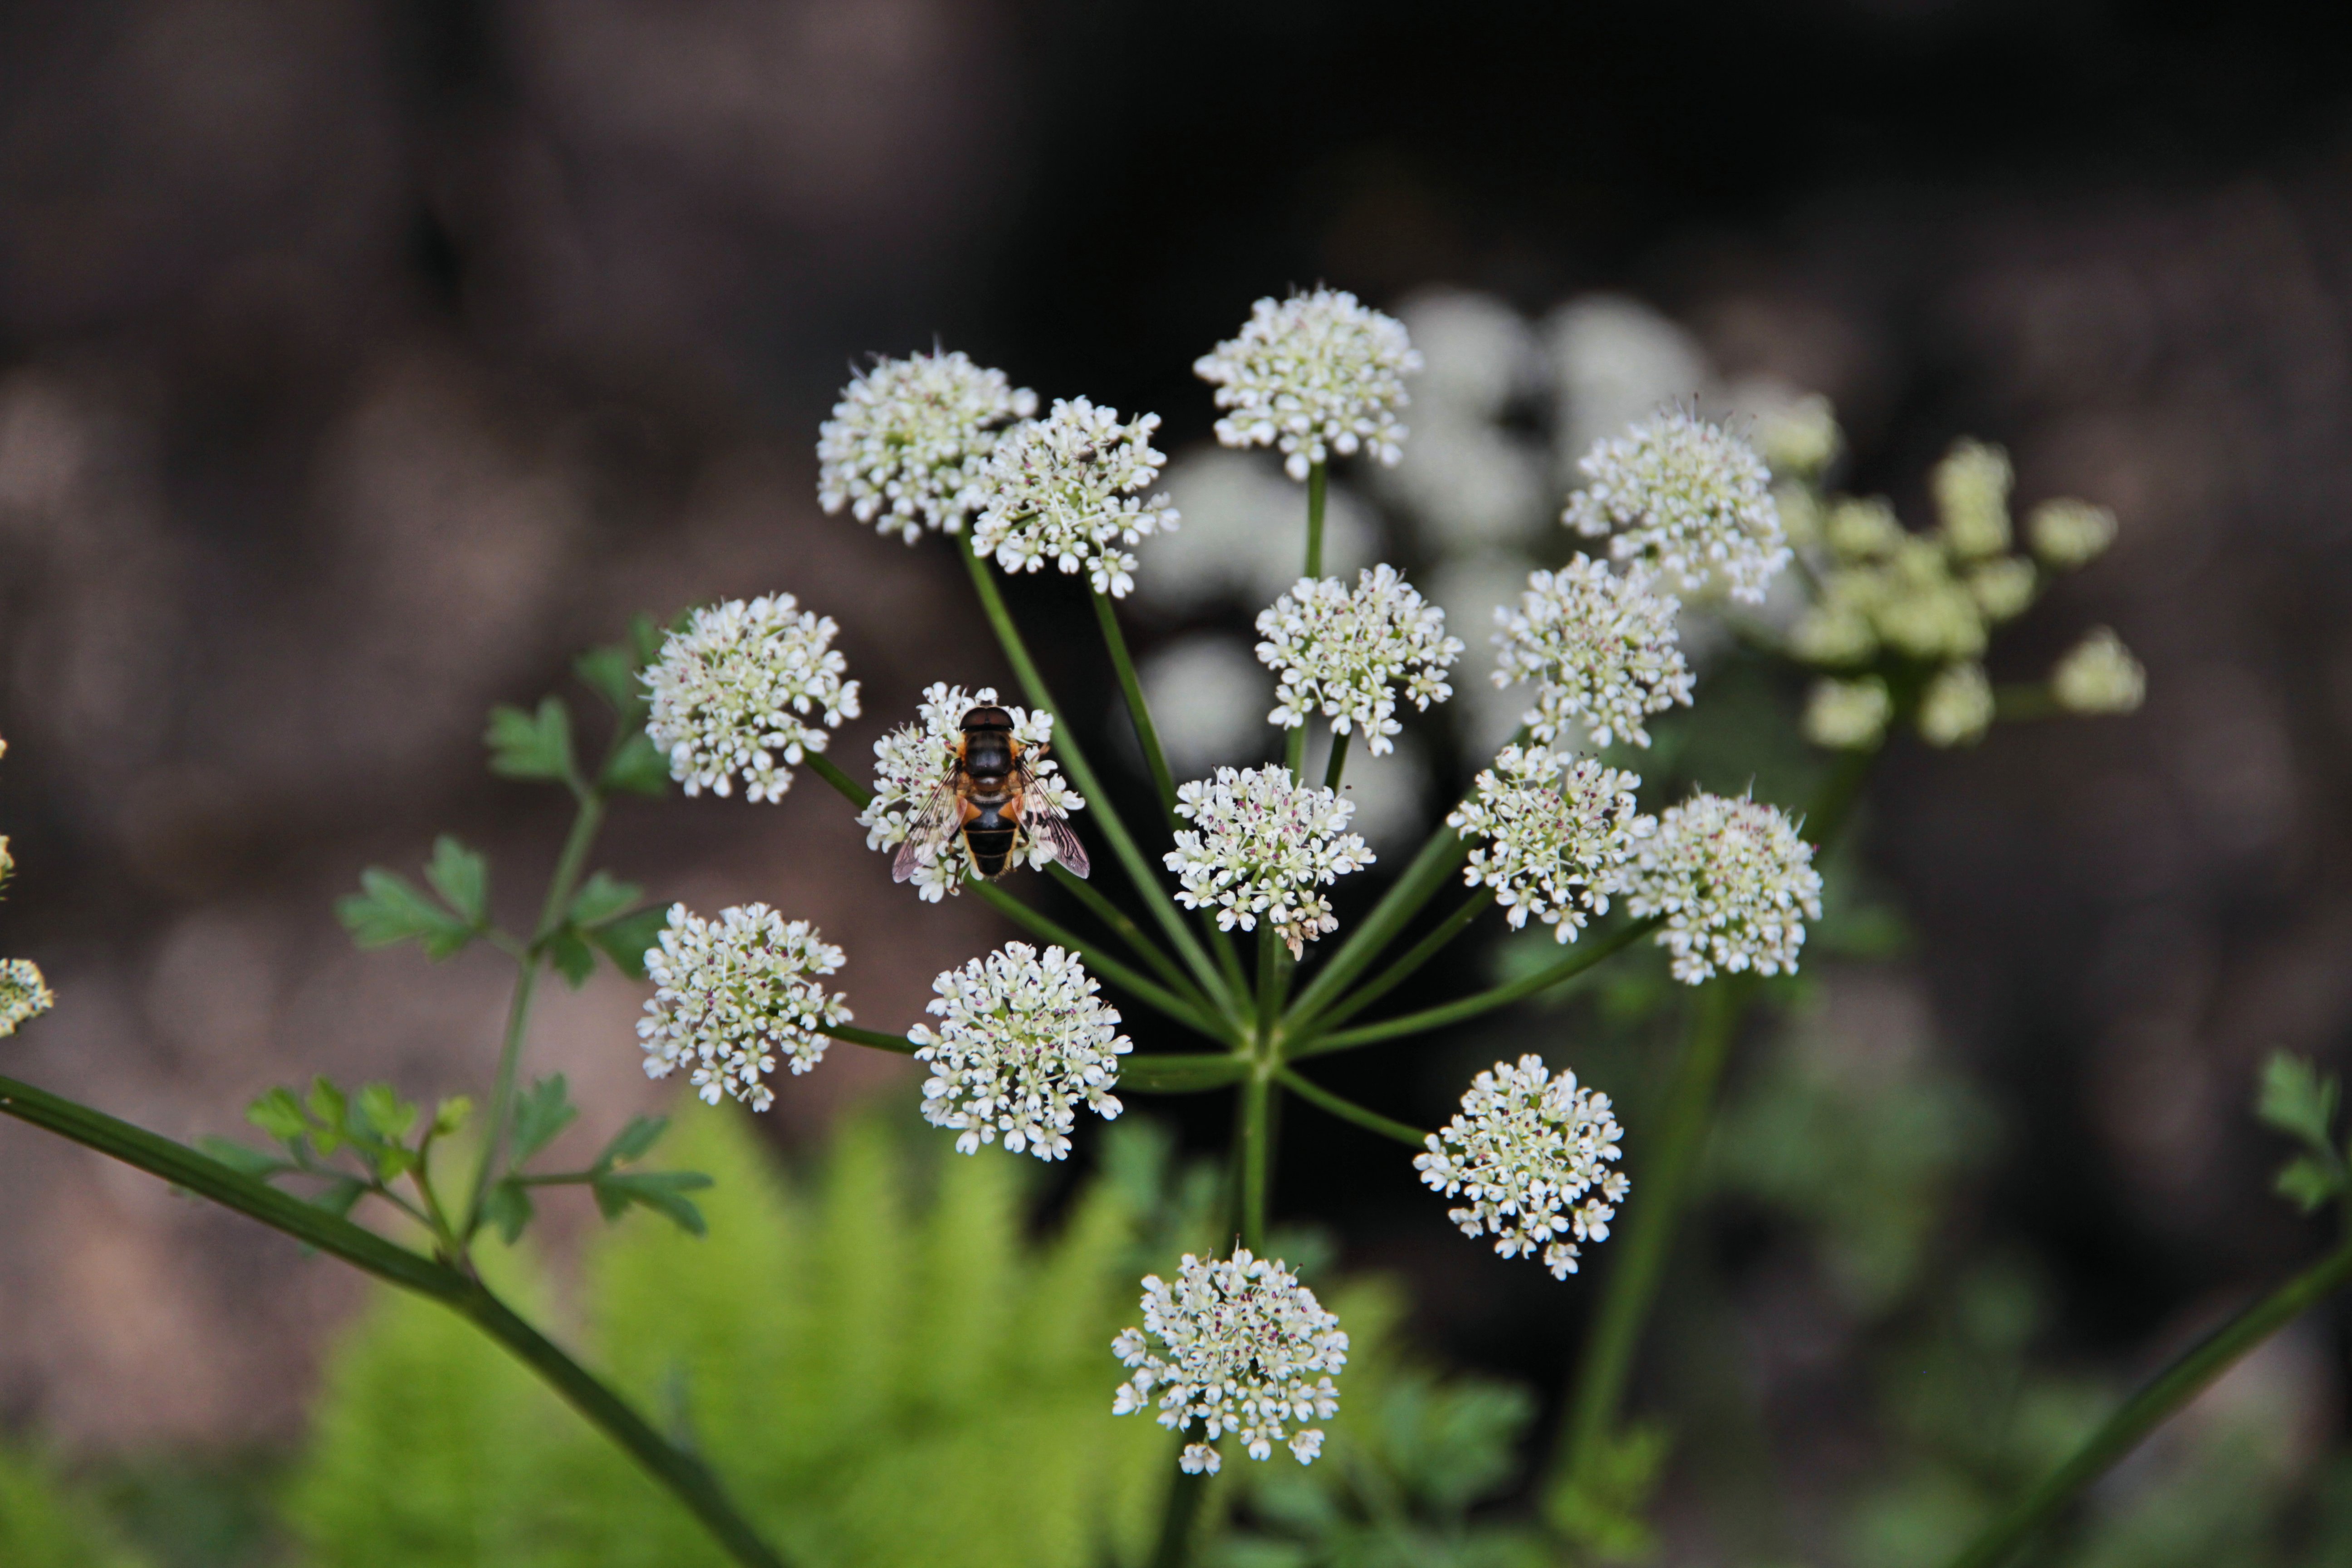 Bee taking a pause for lunch on Wild Carrot.